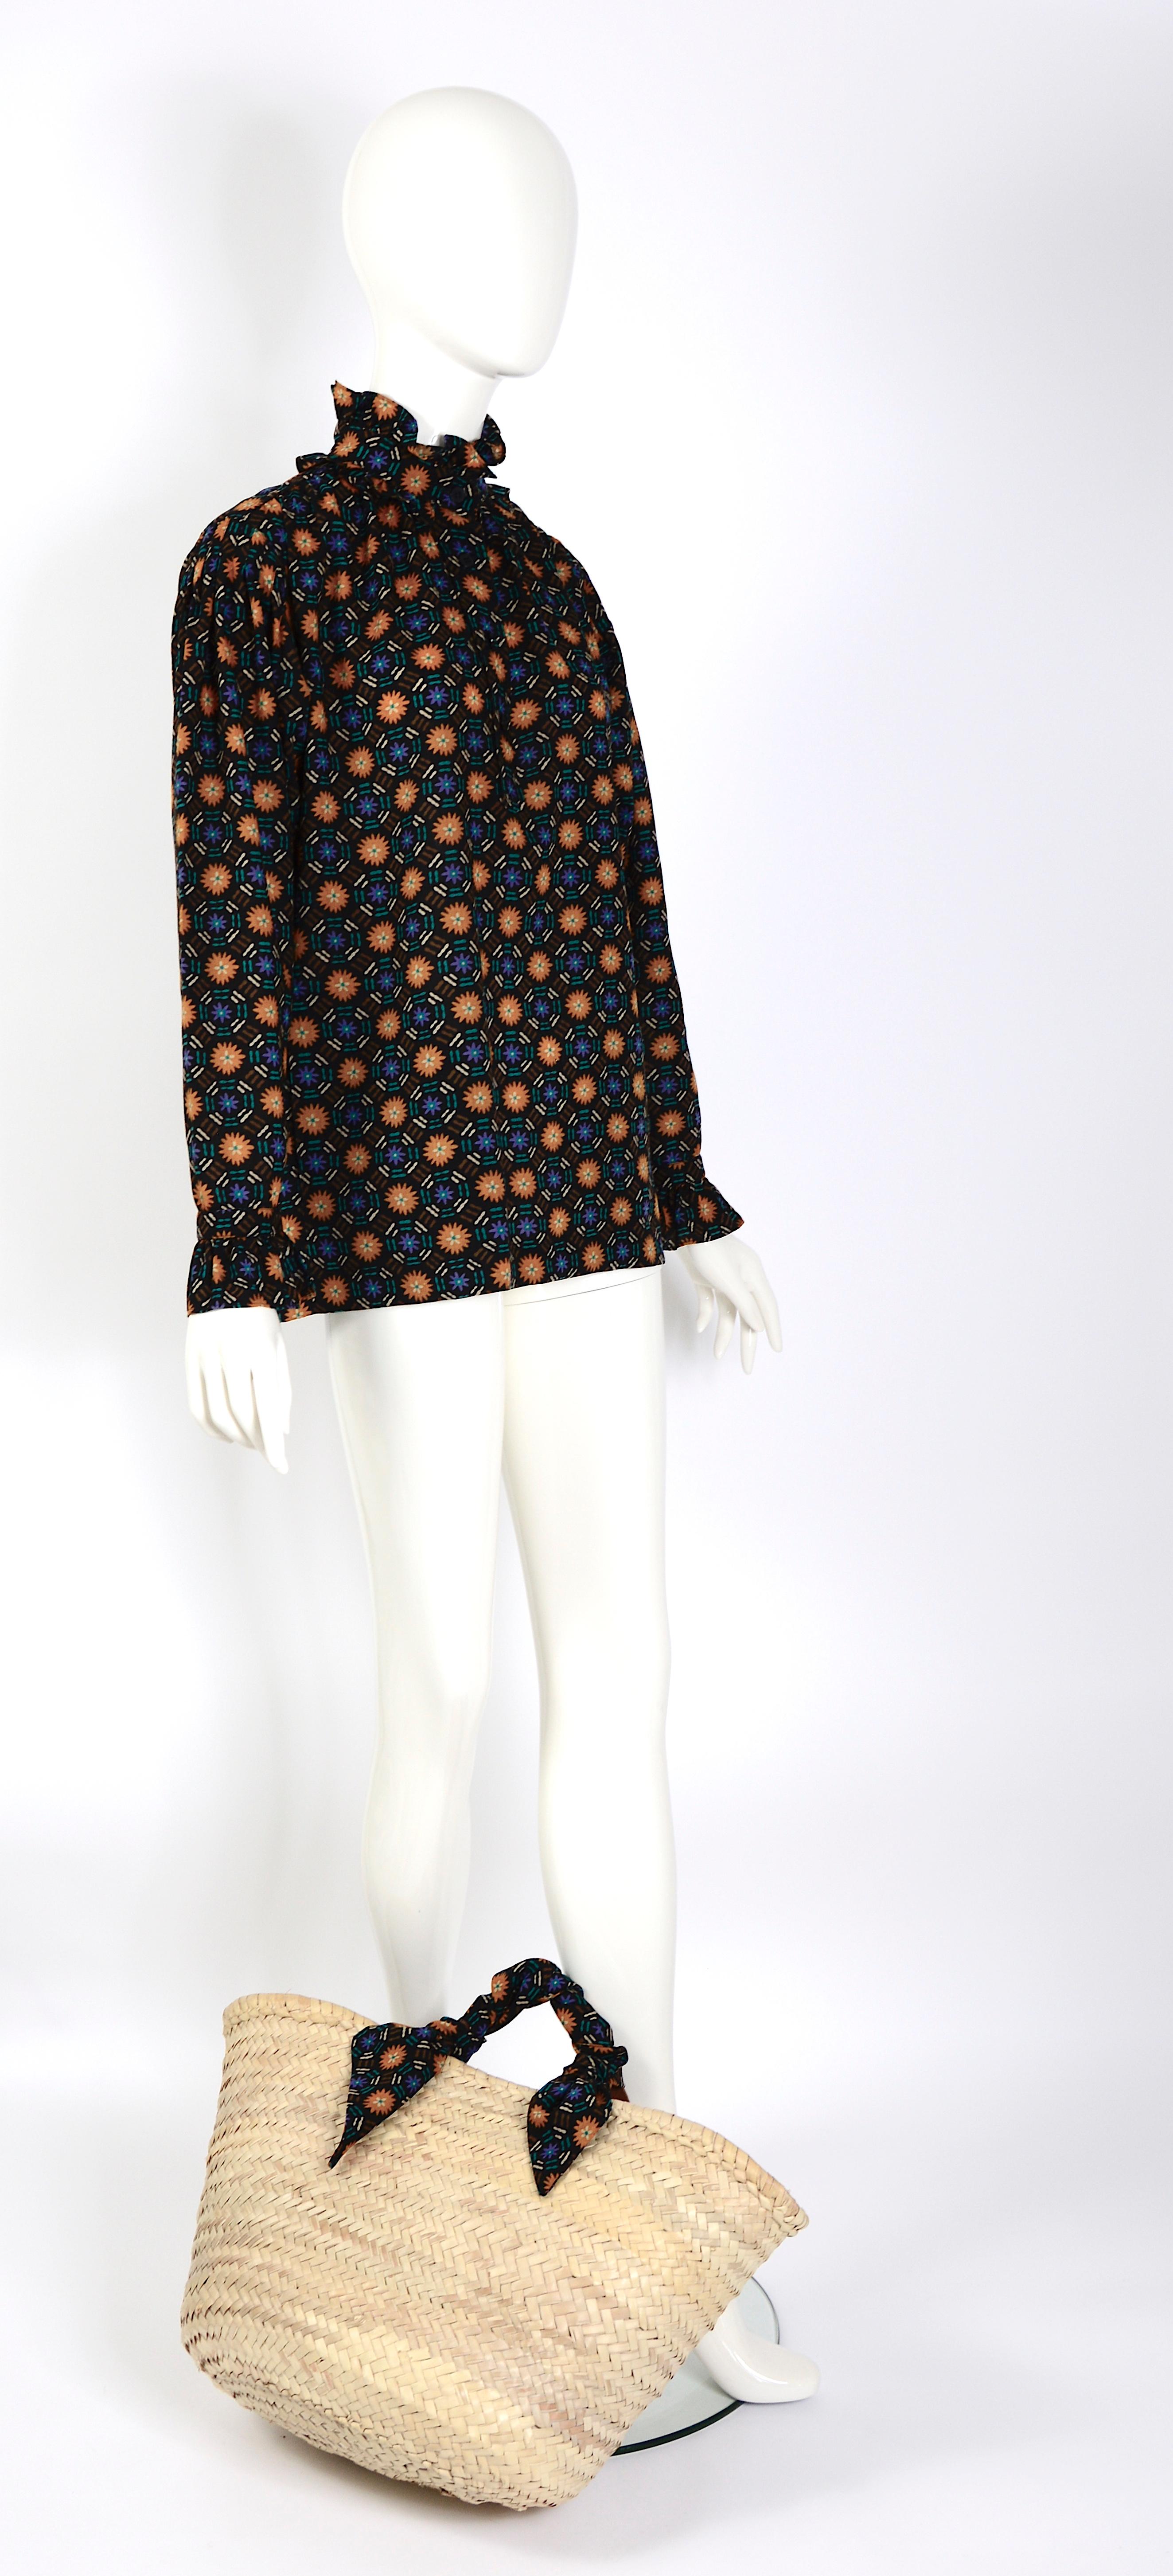 Yves Saint Laurent “rive gauche” 1970s vintage flower design print blouse and matching scarf.

French size 38
Measurements that are taken flat:
Ua to Ua 22inch/56cm(x2) - Waist 23inch/58,5cm(x2) - Sleeve 24inch/61cm - total length 28inch/71cm
I
n